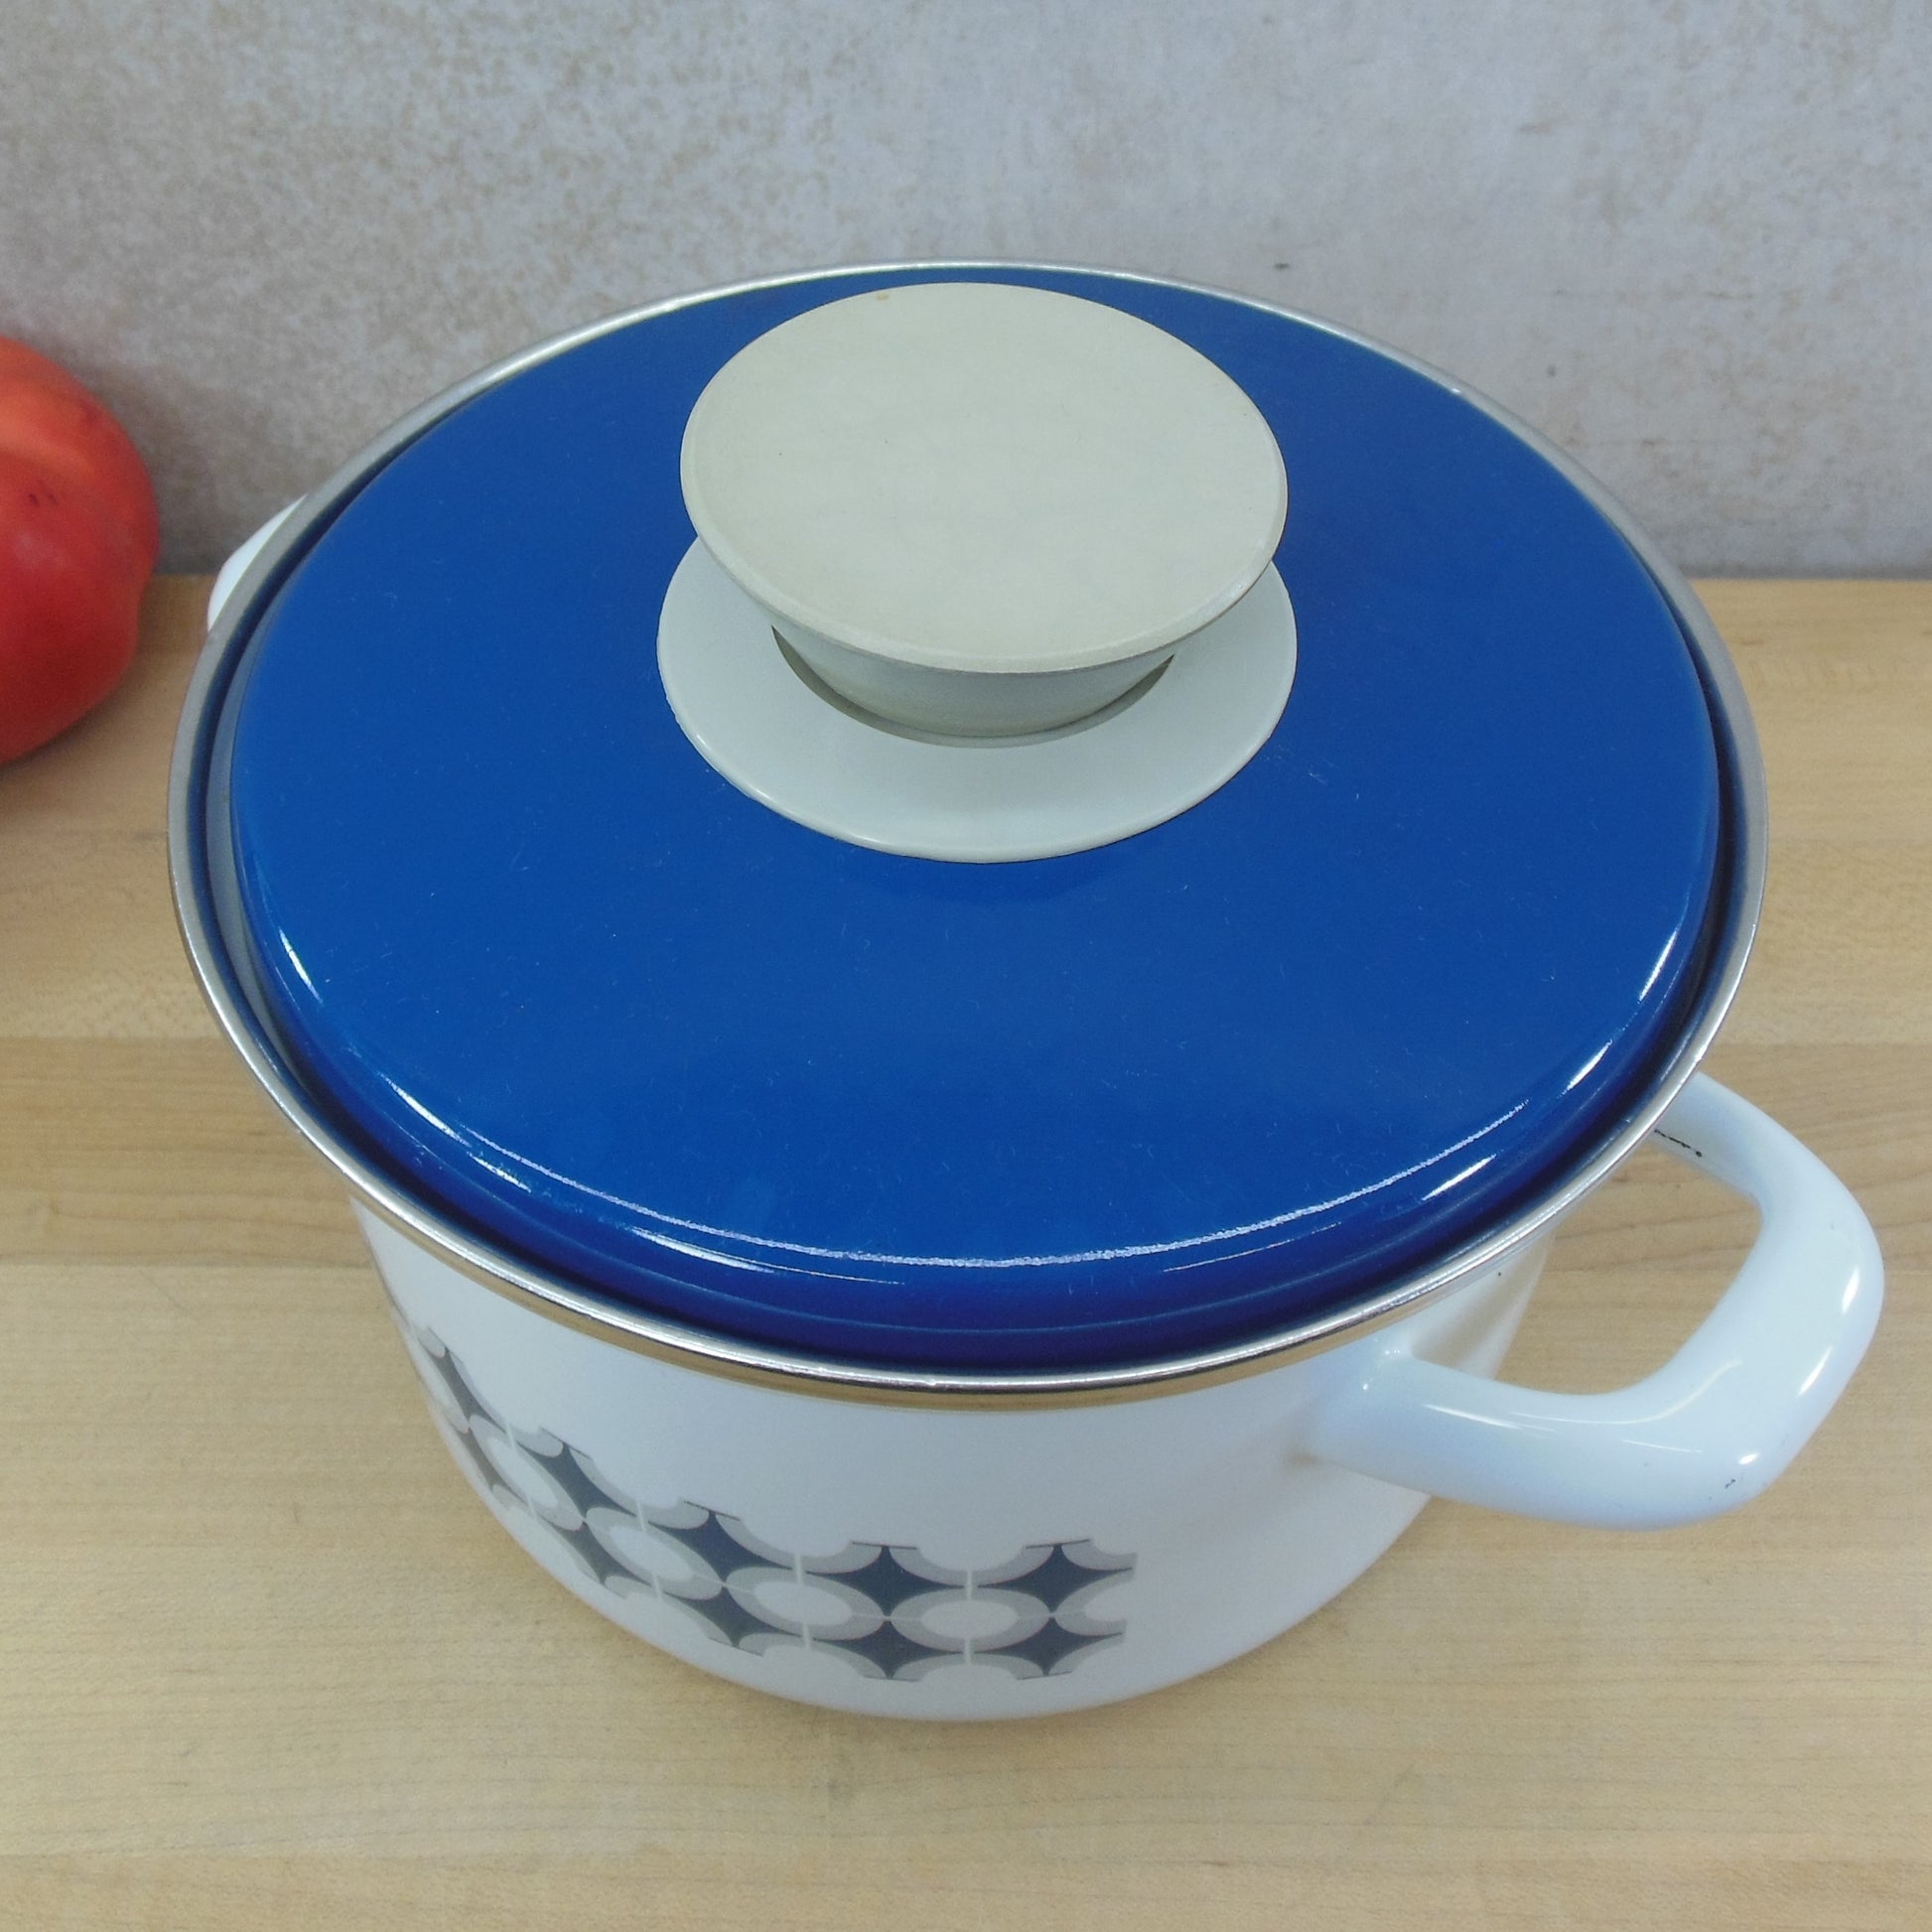 Vintage Blue and White Speckled Enamel Cookware 